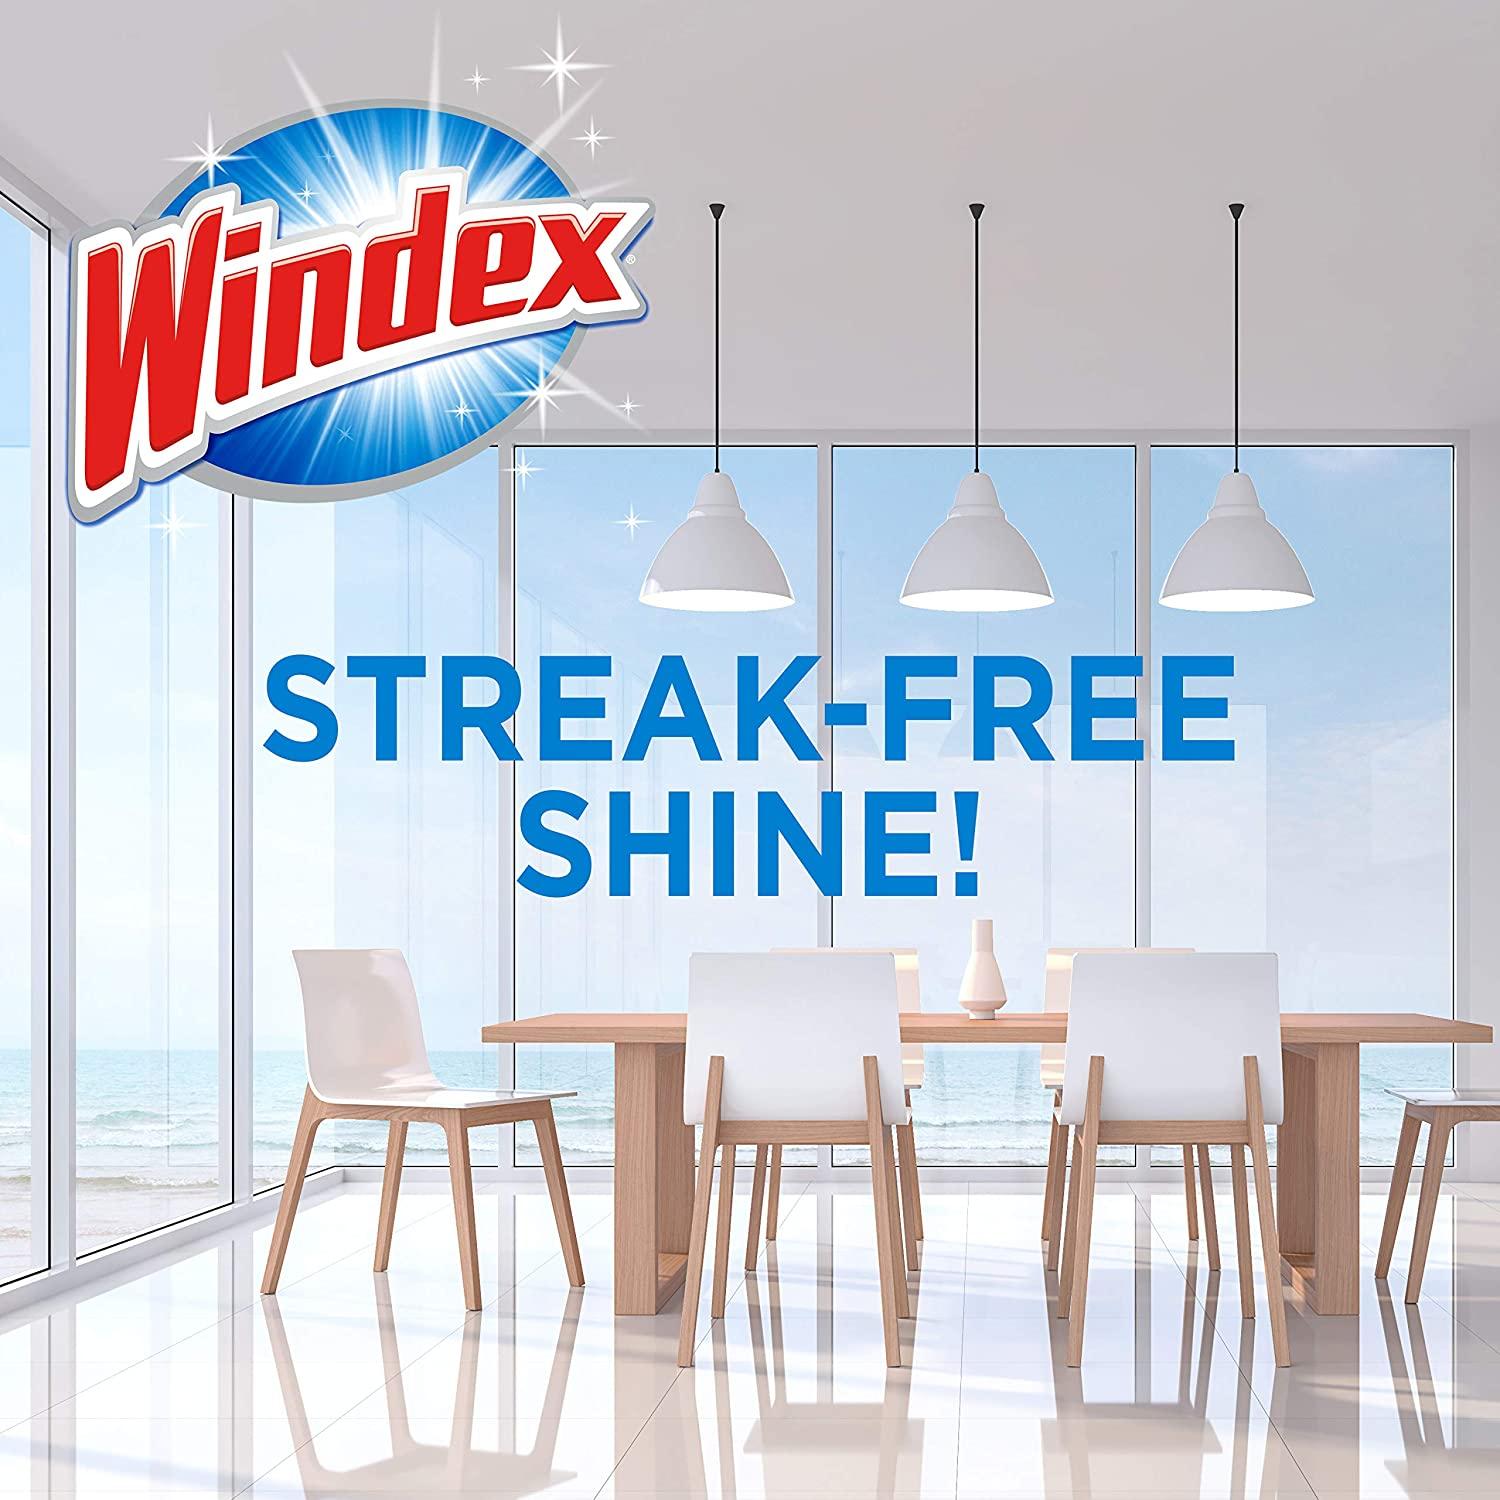 Windex 70232 Original Windex Glass & Surface Wipes 28 Count